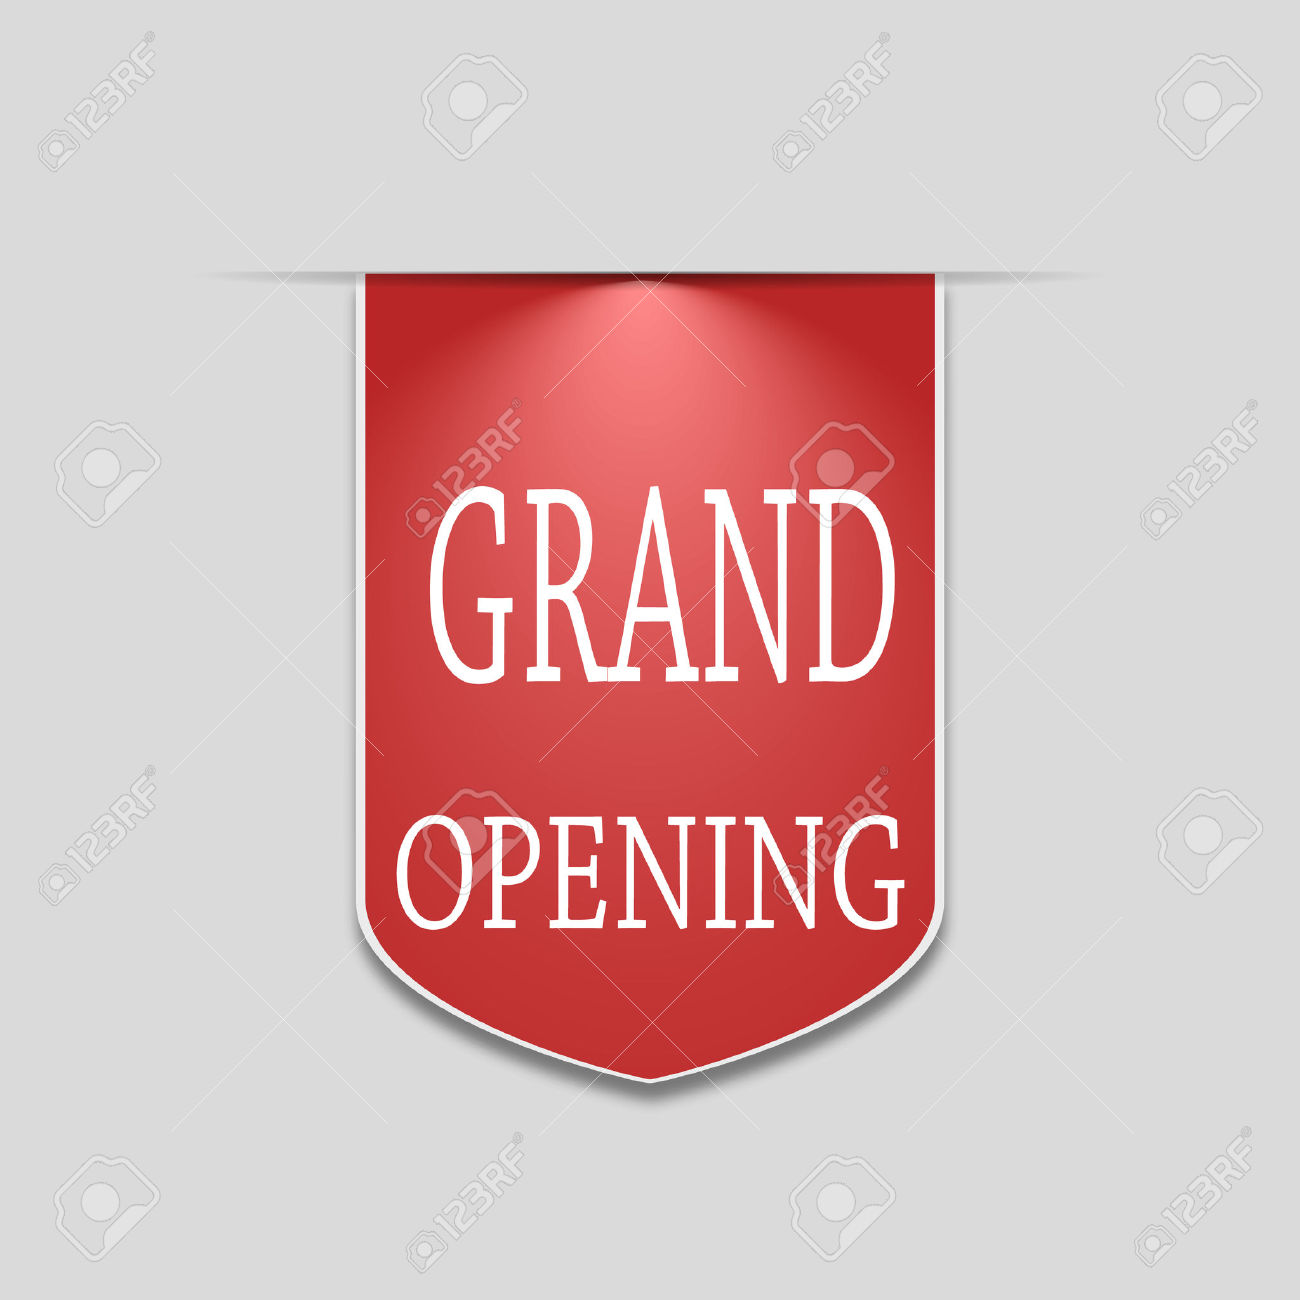 961 Store Openings Cliparts, Stock Vector And Royalty Free Store.